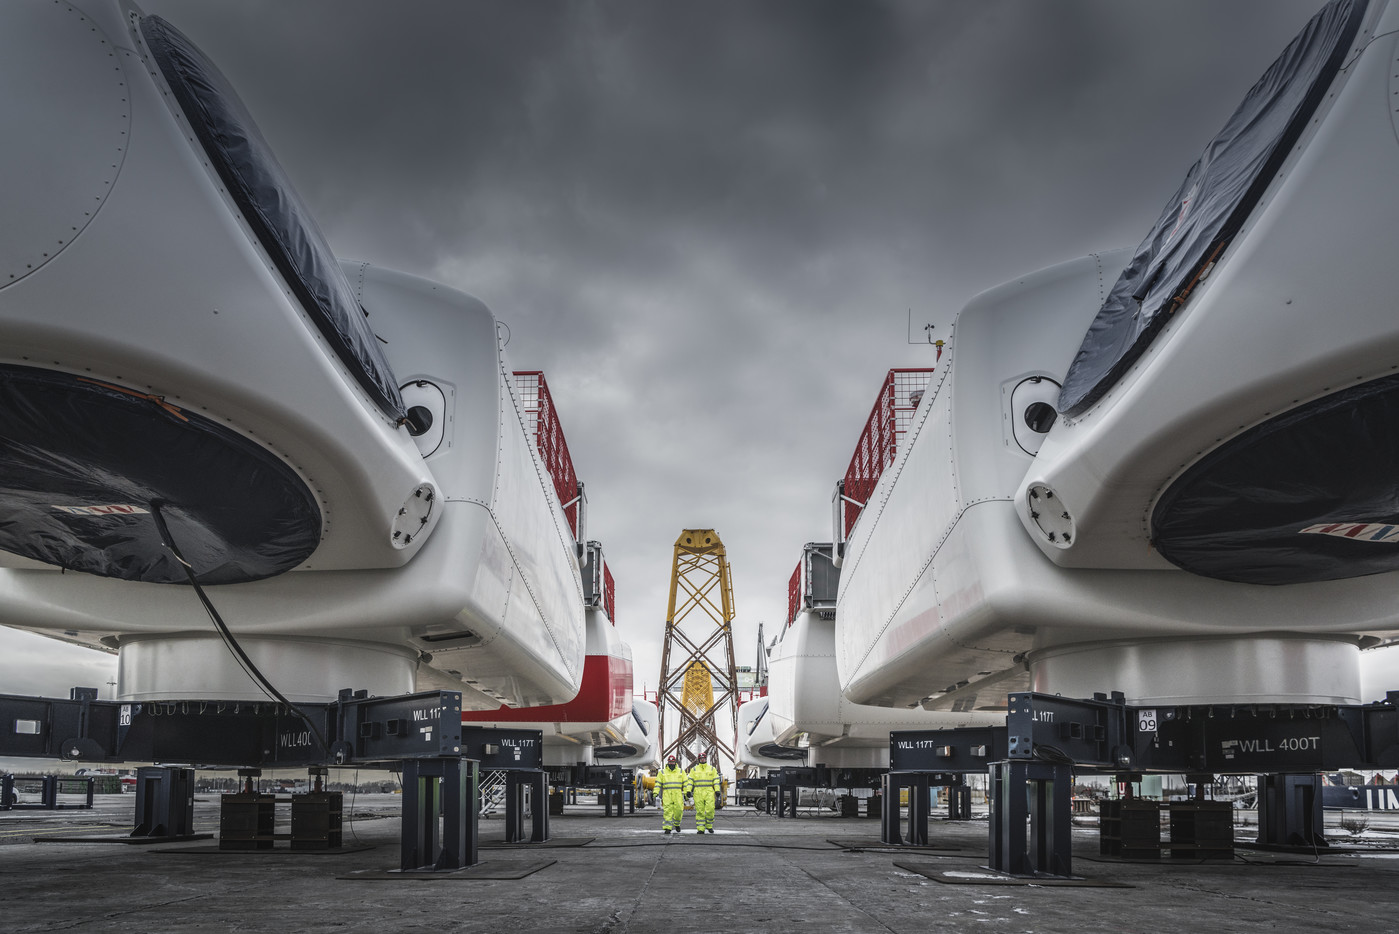 MHI Vestas Offshore Wind nacelle assembly facility is located in Lindø on the Danish island of Funen.